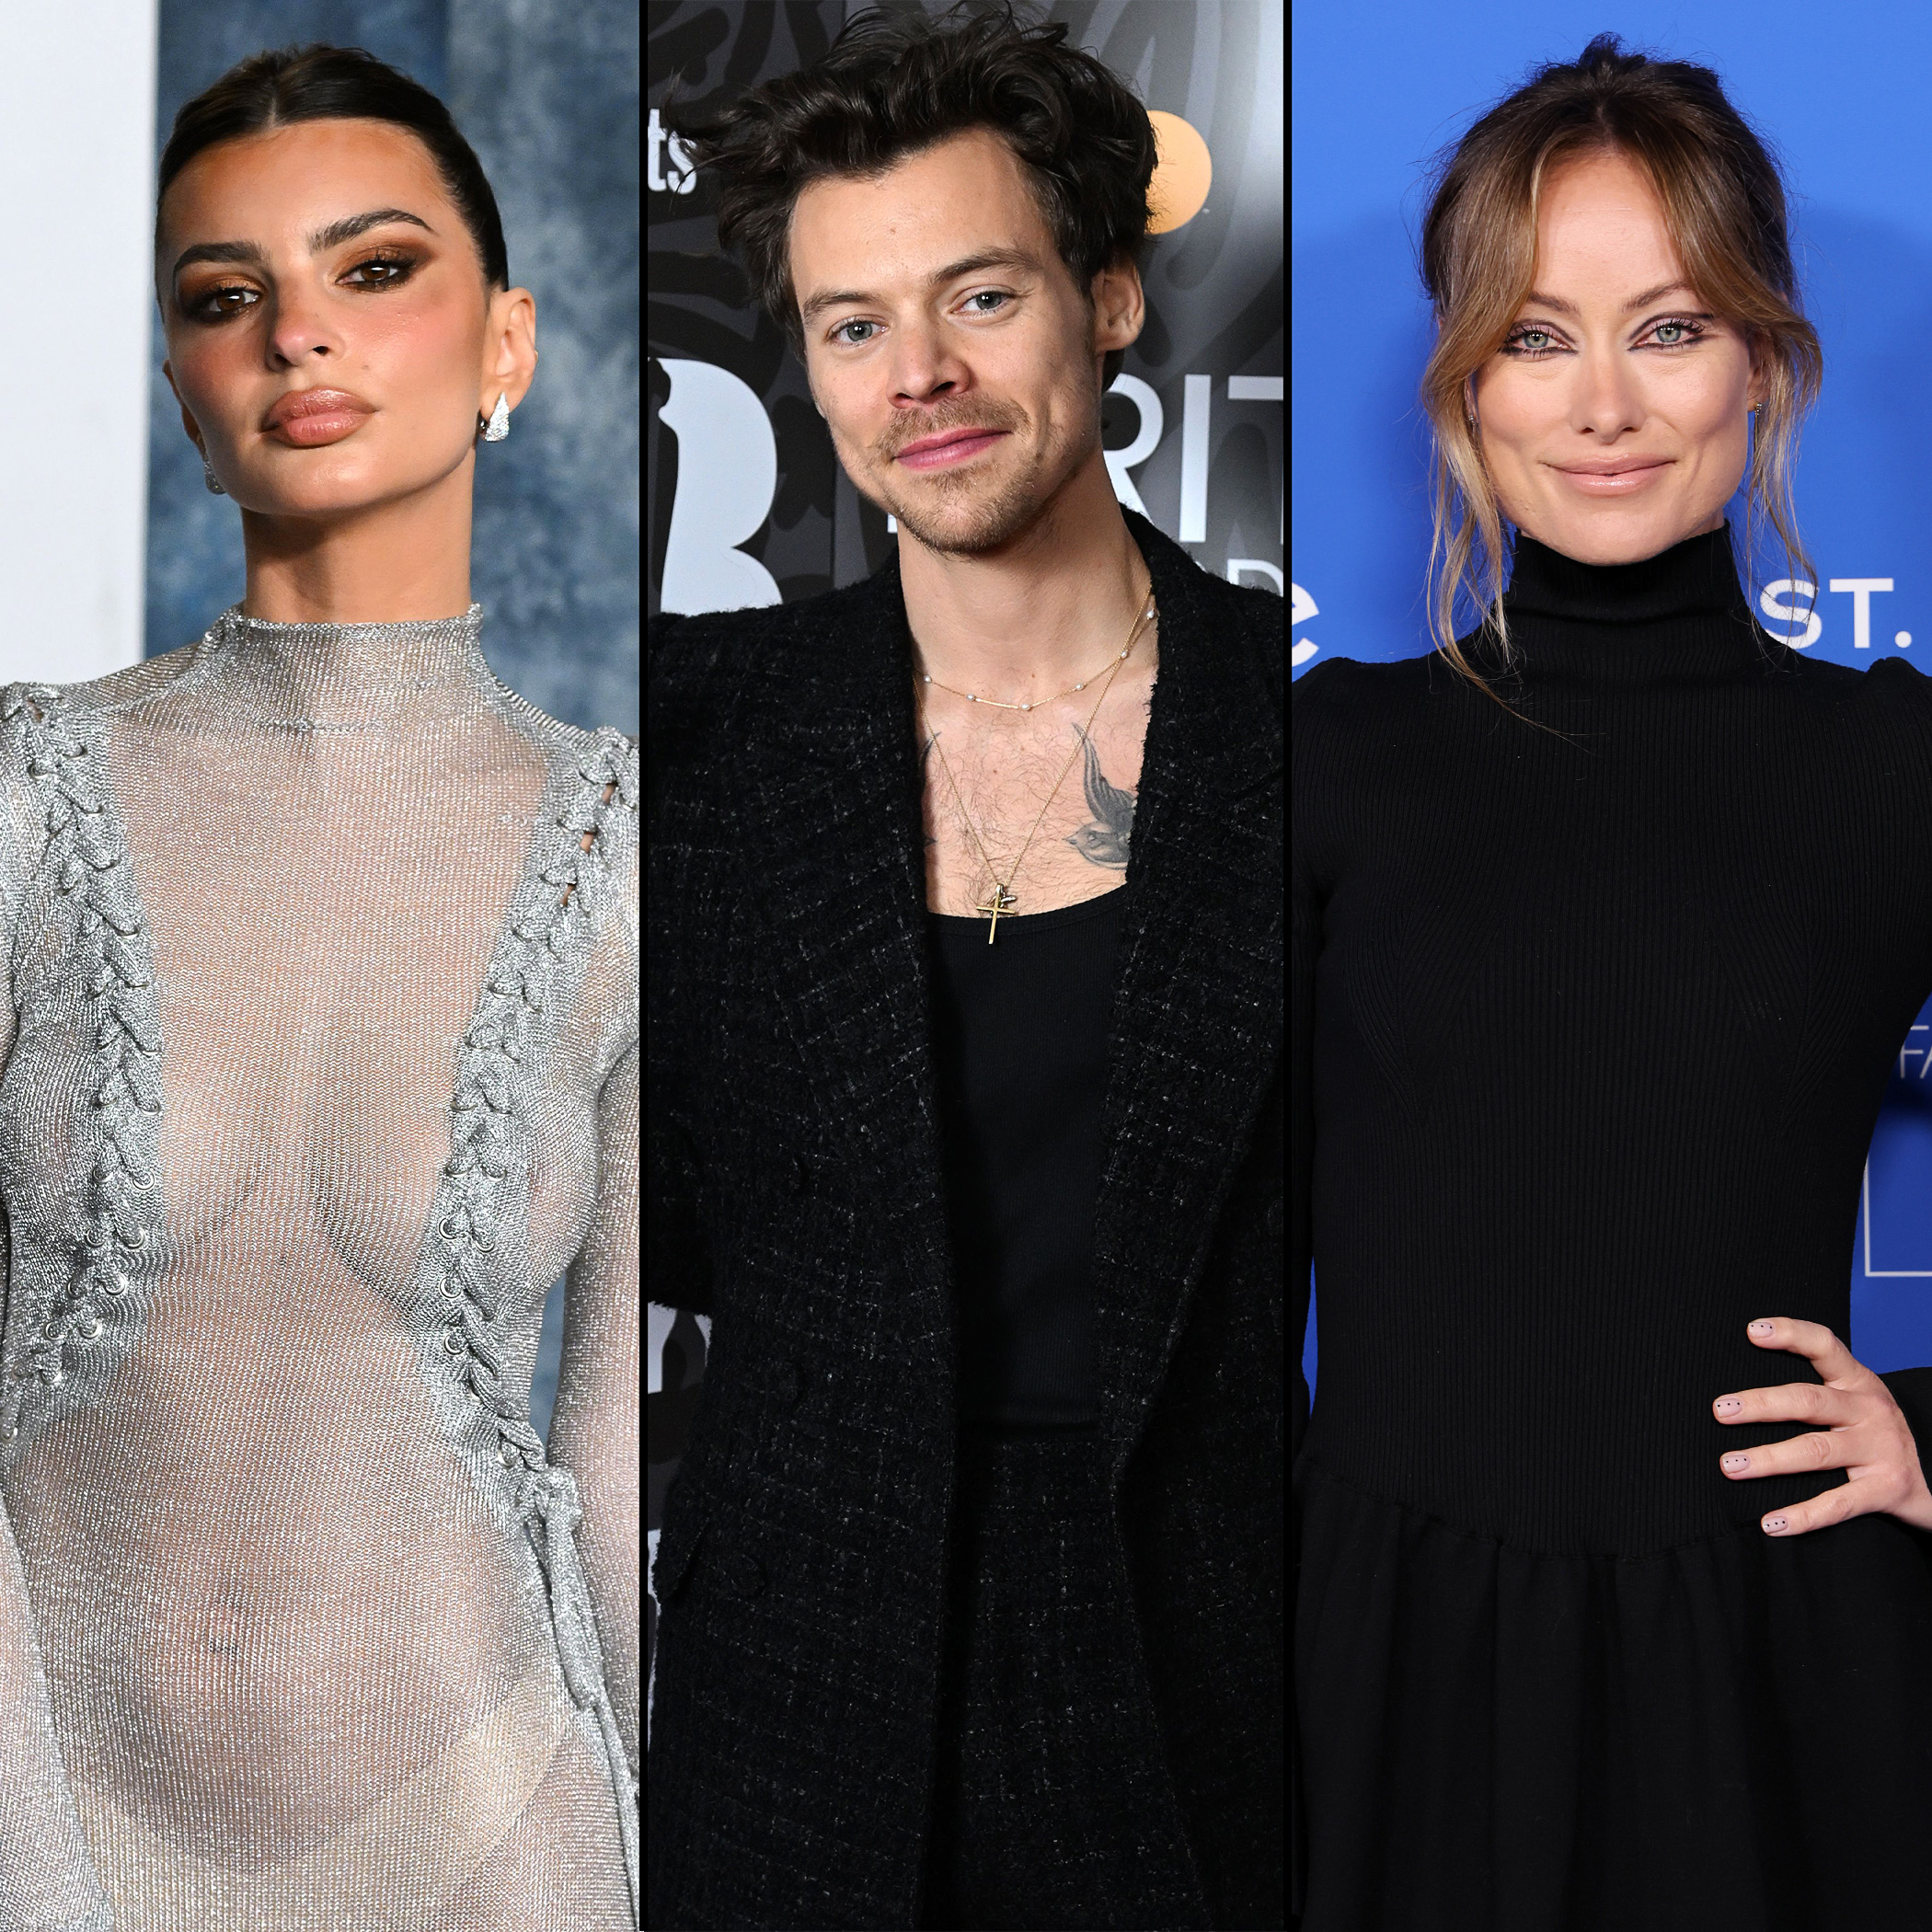 Harry Styles and Olivia Wilde Spotted Showing PDA at a Wedding